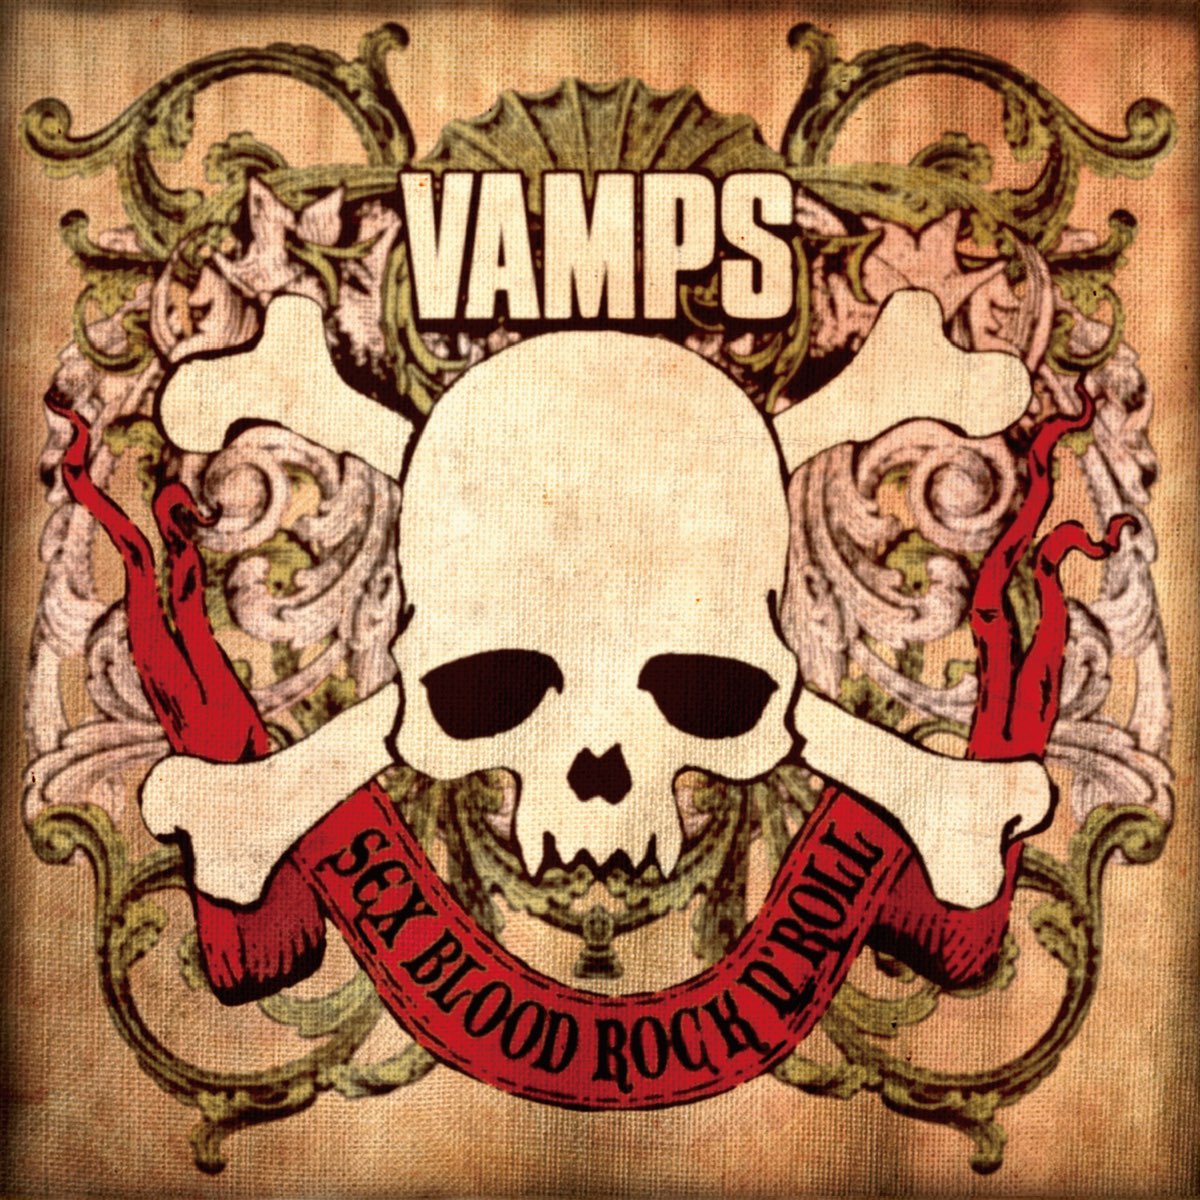 Sex Blood Rock N Roll by VAMPS on